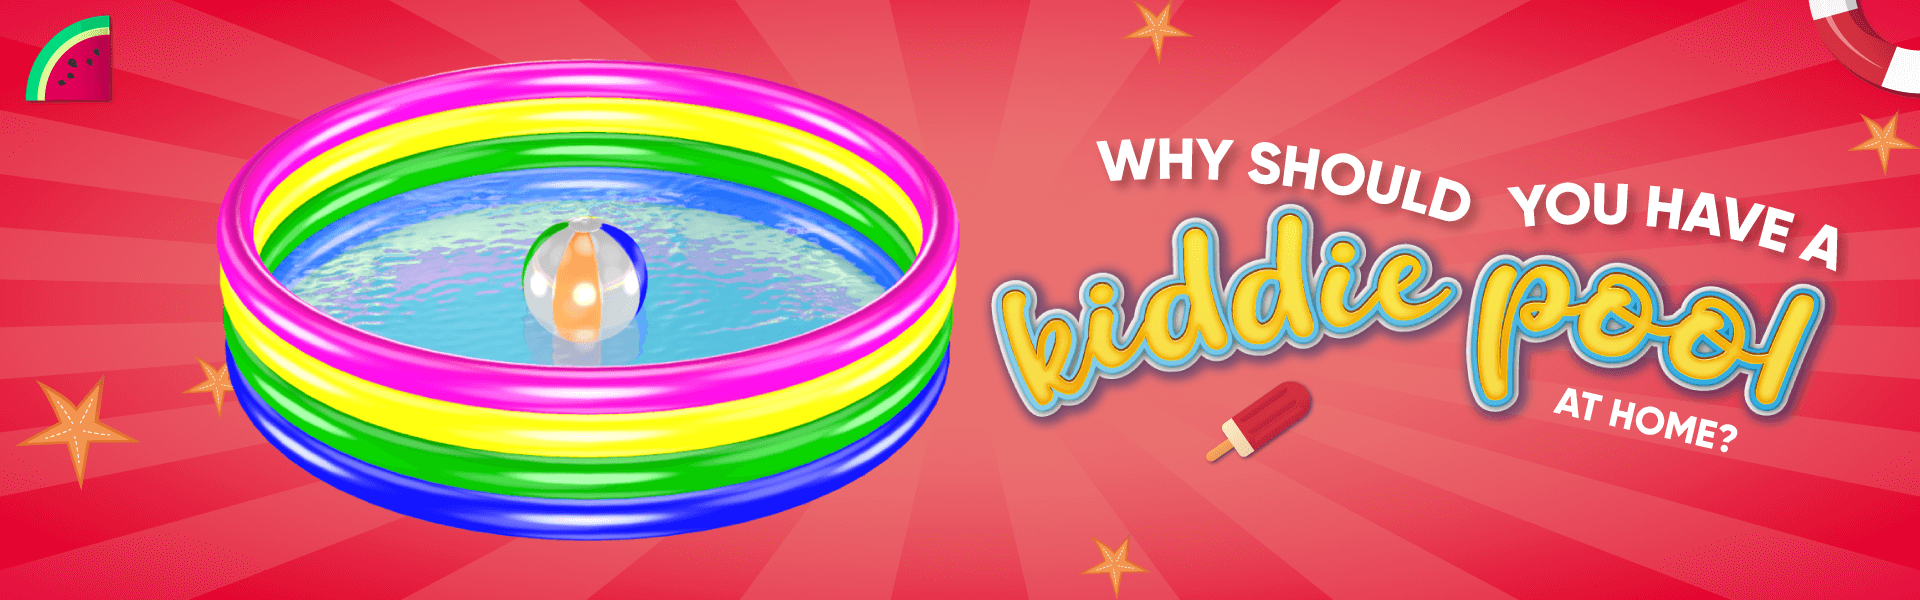 Why-should-you-have-a-kiddie-pool-at-home-Colorland-Toys